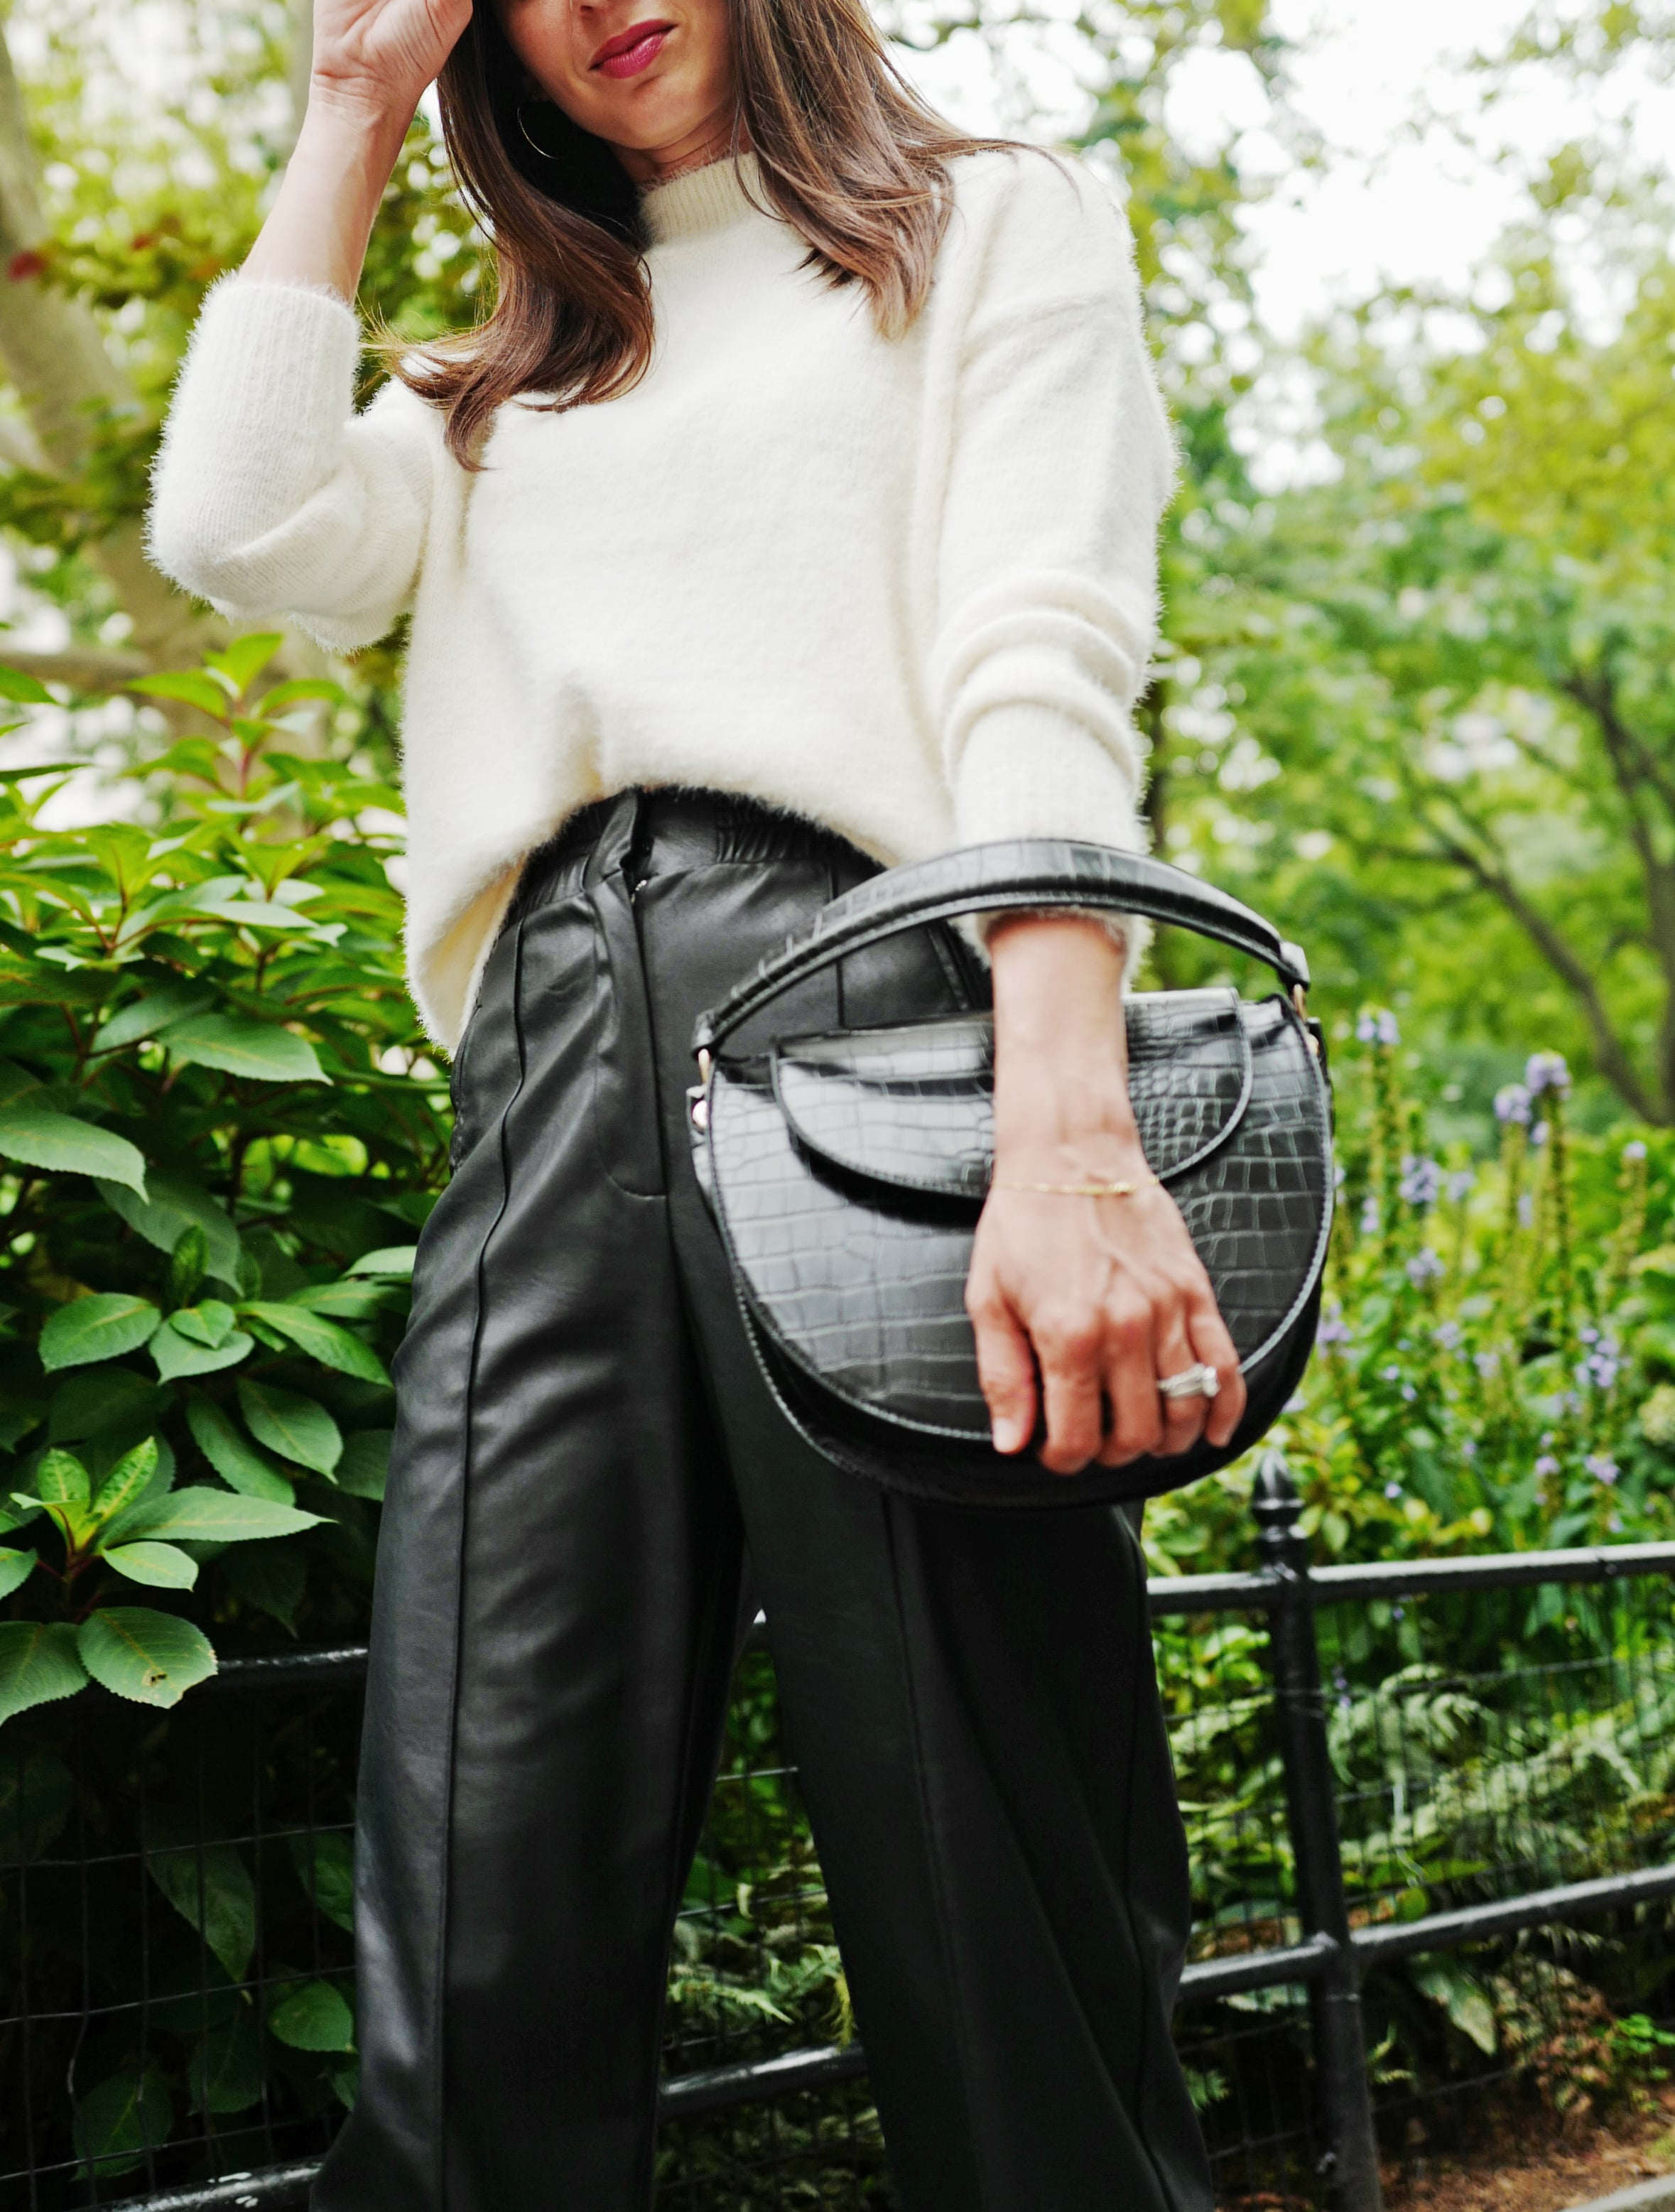 Pretty Little Thing + Plus Brown Faux Leather Croc Embosed Flare Pants